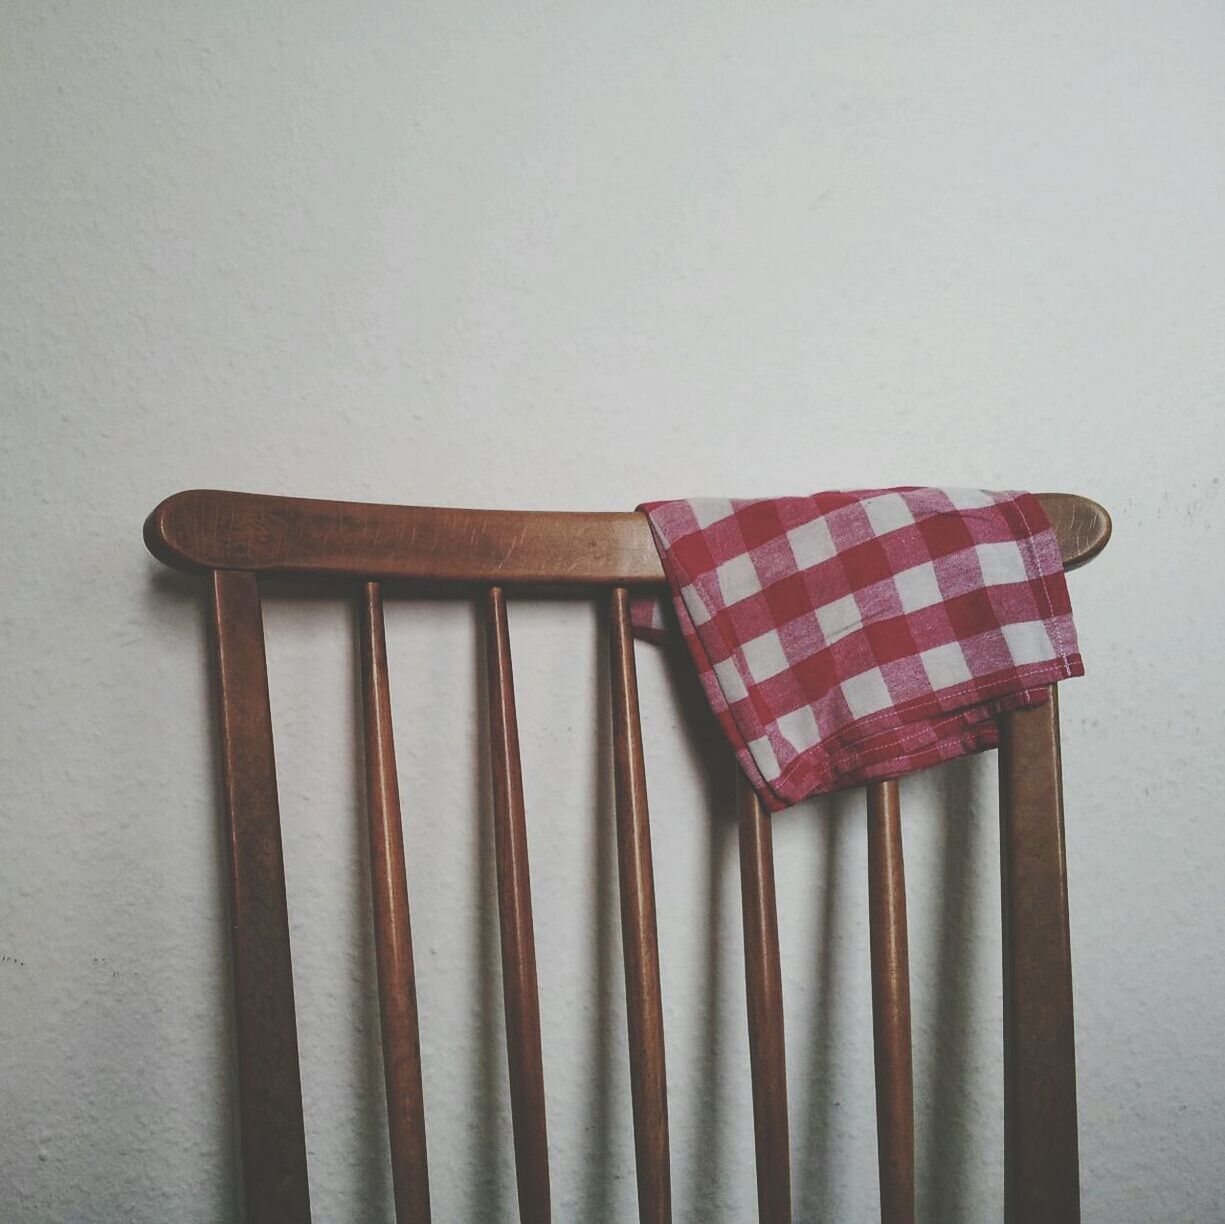 Tablecloth on wooden chair against wall in room